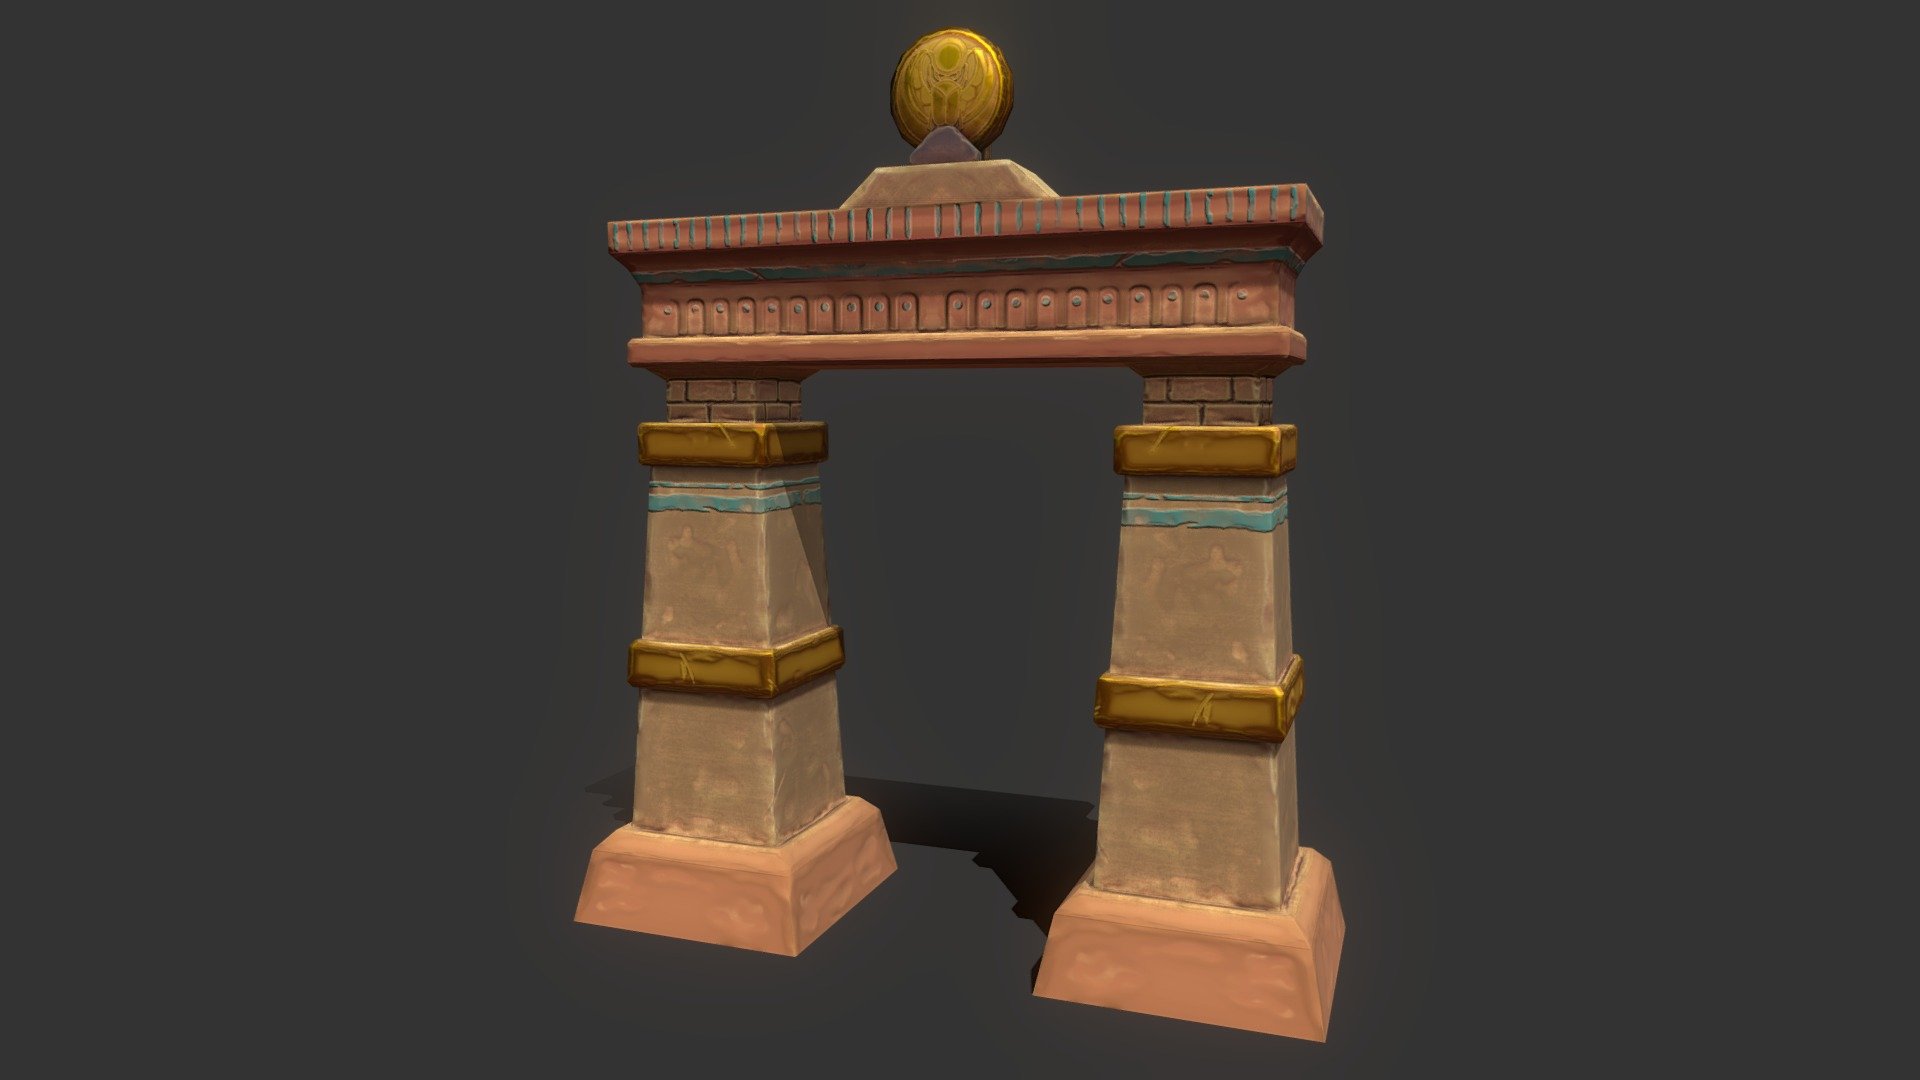 Further practice using Substance Painter to make hand painted PBR textures for this Egyptian inspired arch 3d model